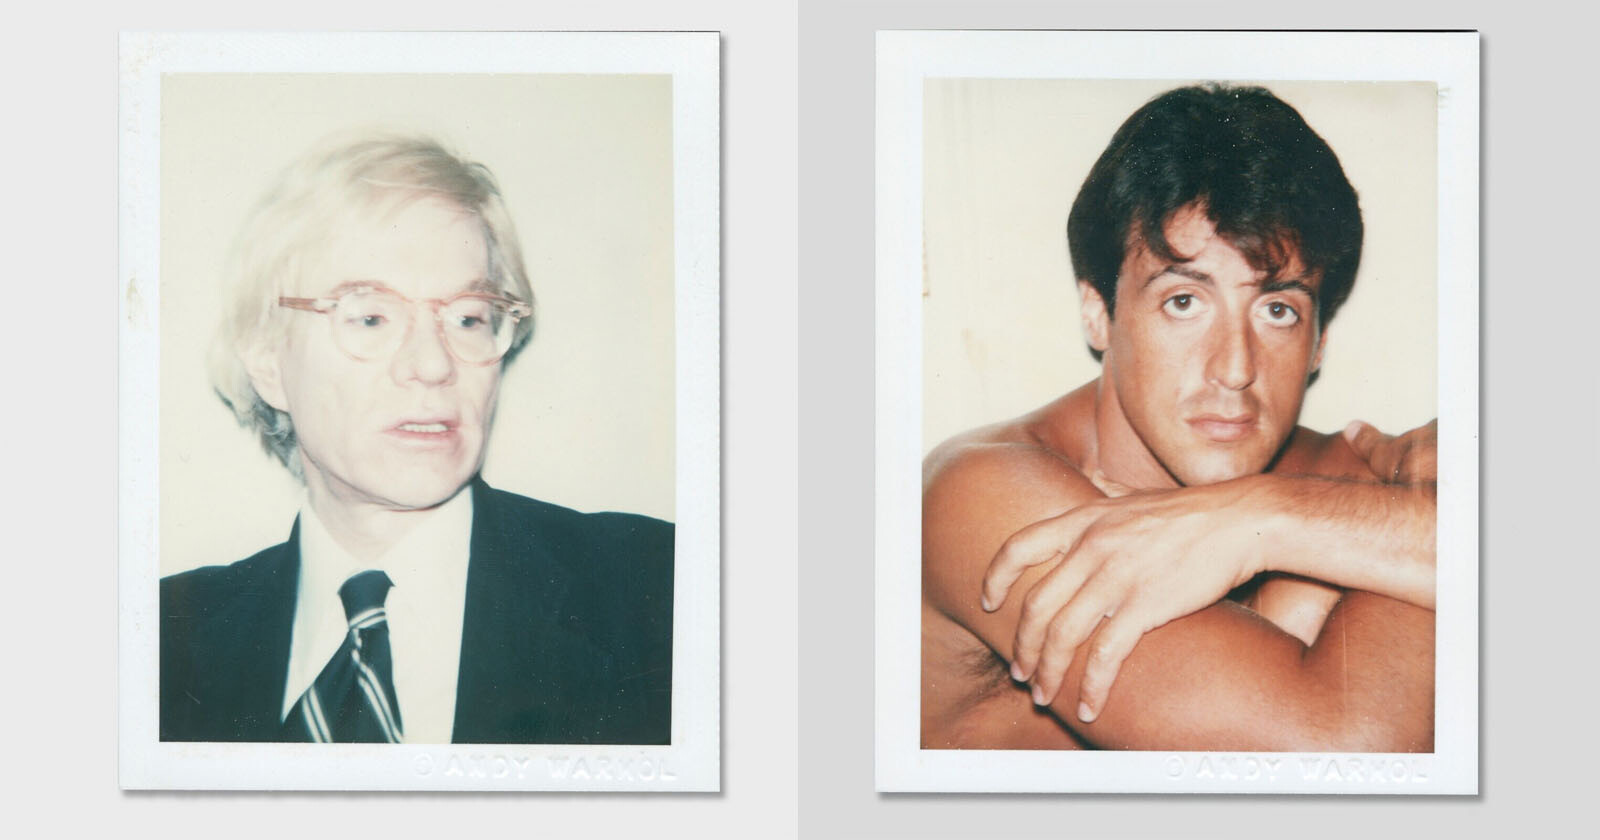 50 of Andy Warhol’s Polaroids, Prints, Books, and More Are For Sale on eBay